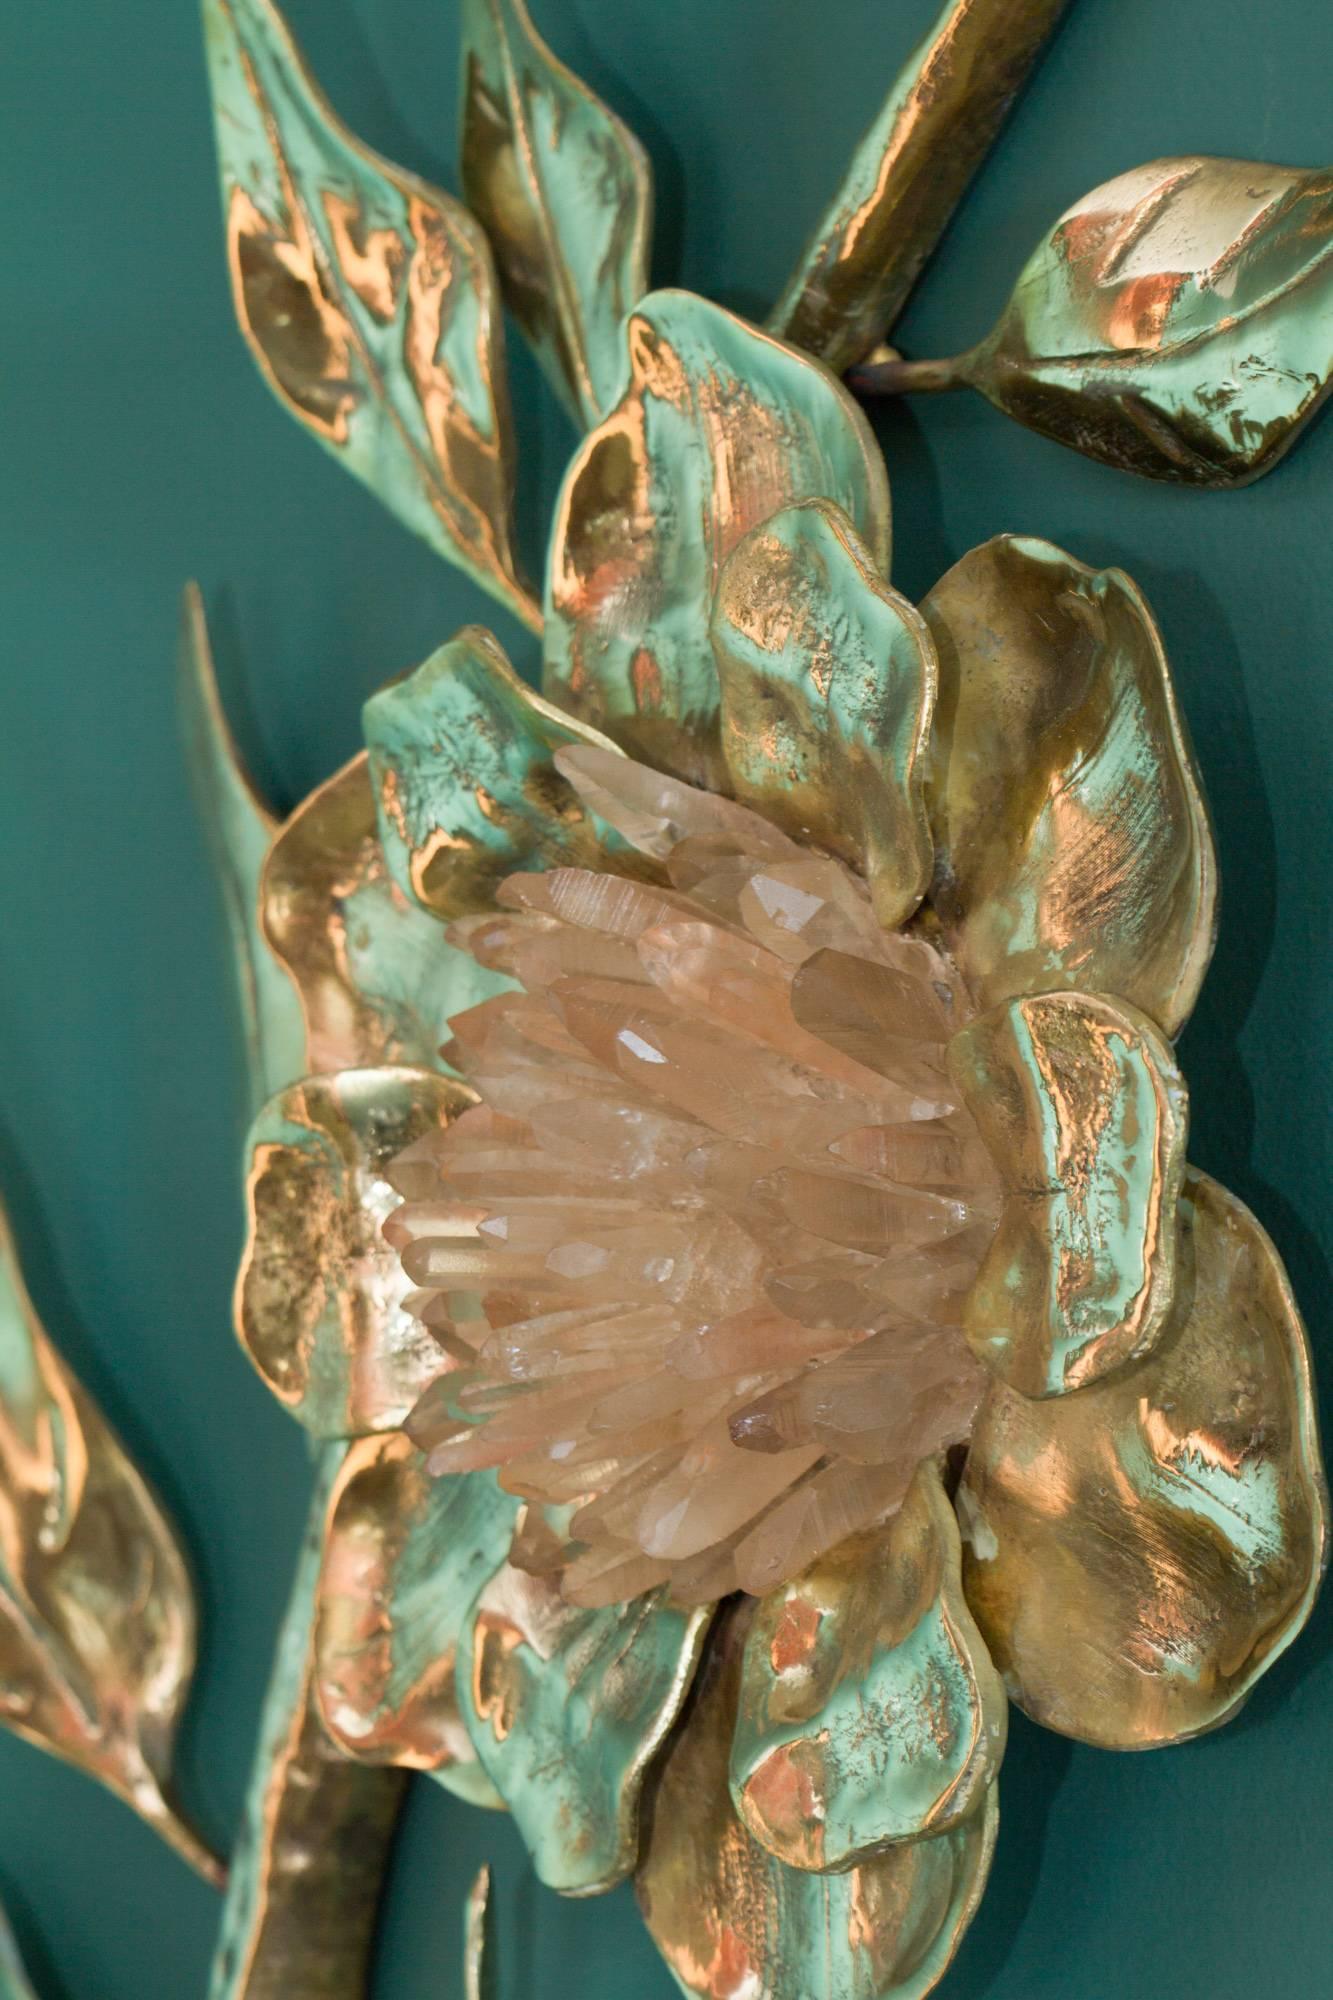 French Pure Rock Crystal Sconce, “Bay Flower, ” Demian Quincke